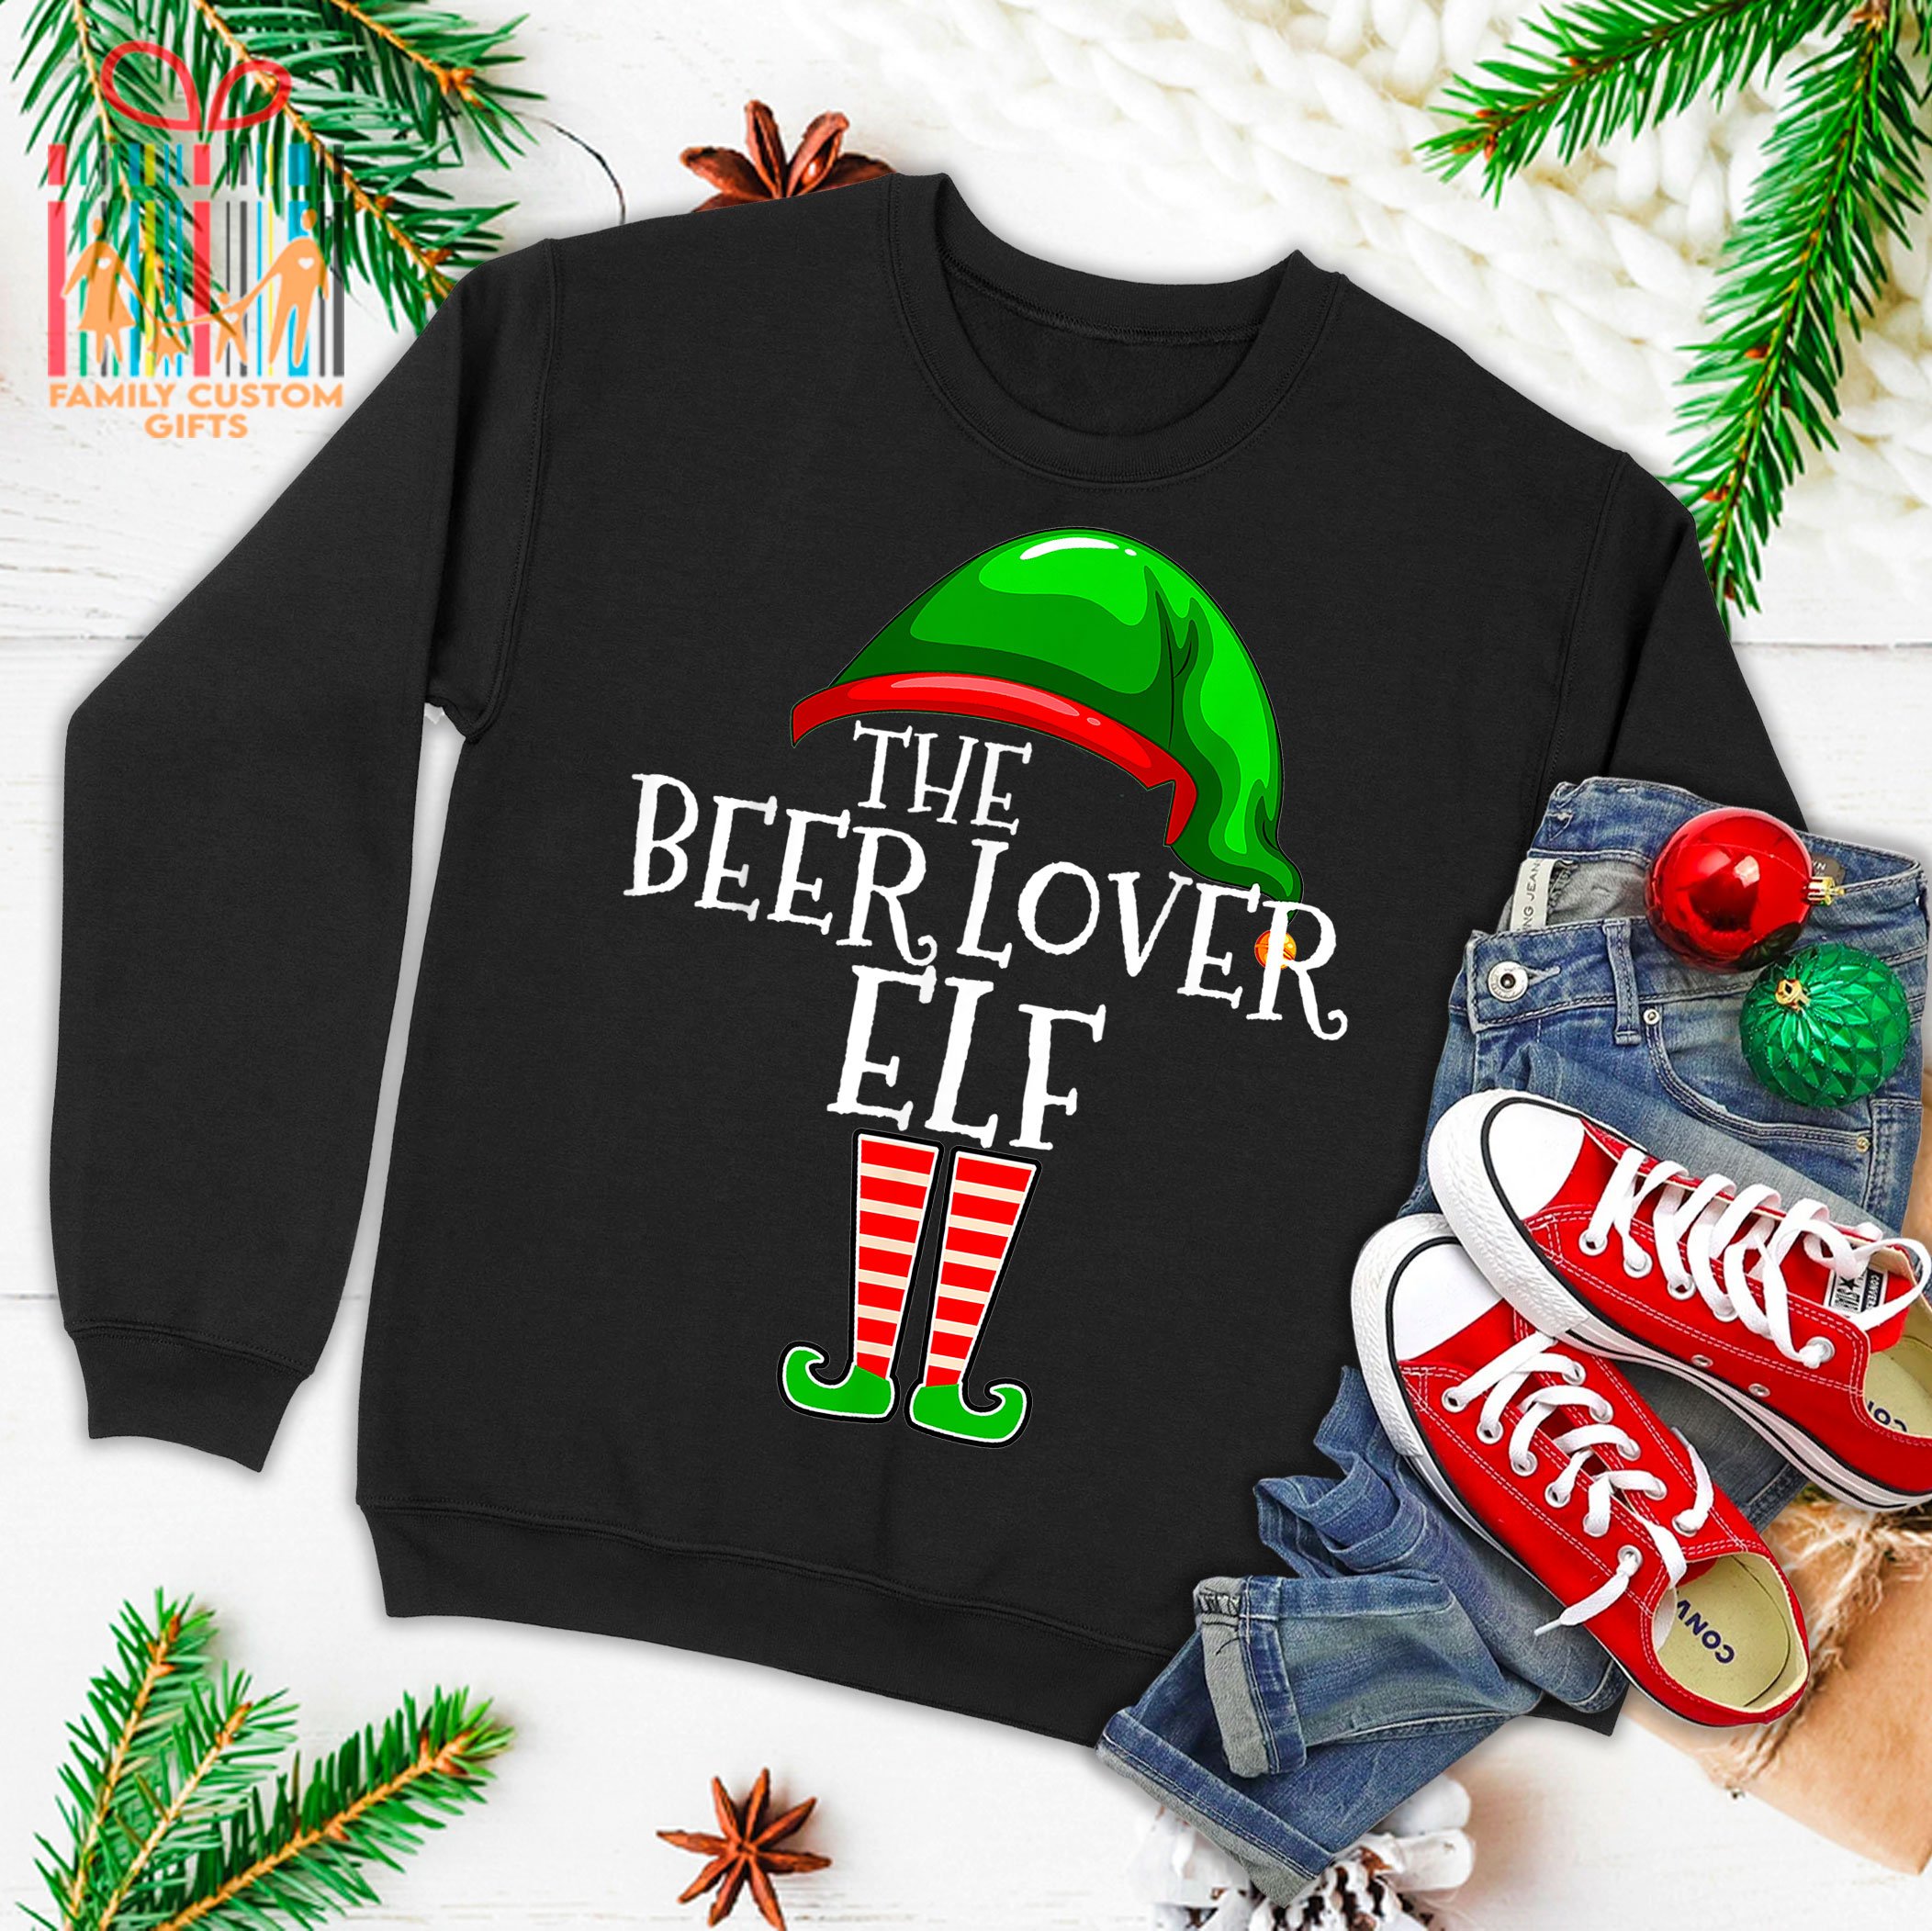 Beer Lover Elf Group Matching Family Christmas Gift Funny Ugly Christmas Sweater 2023 T-Shirt